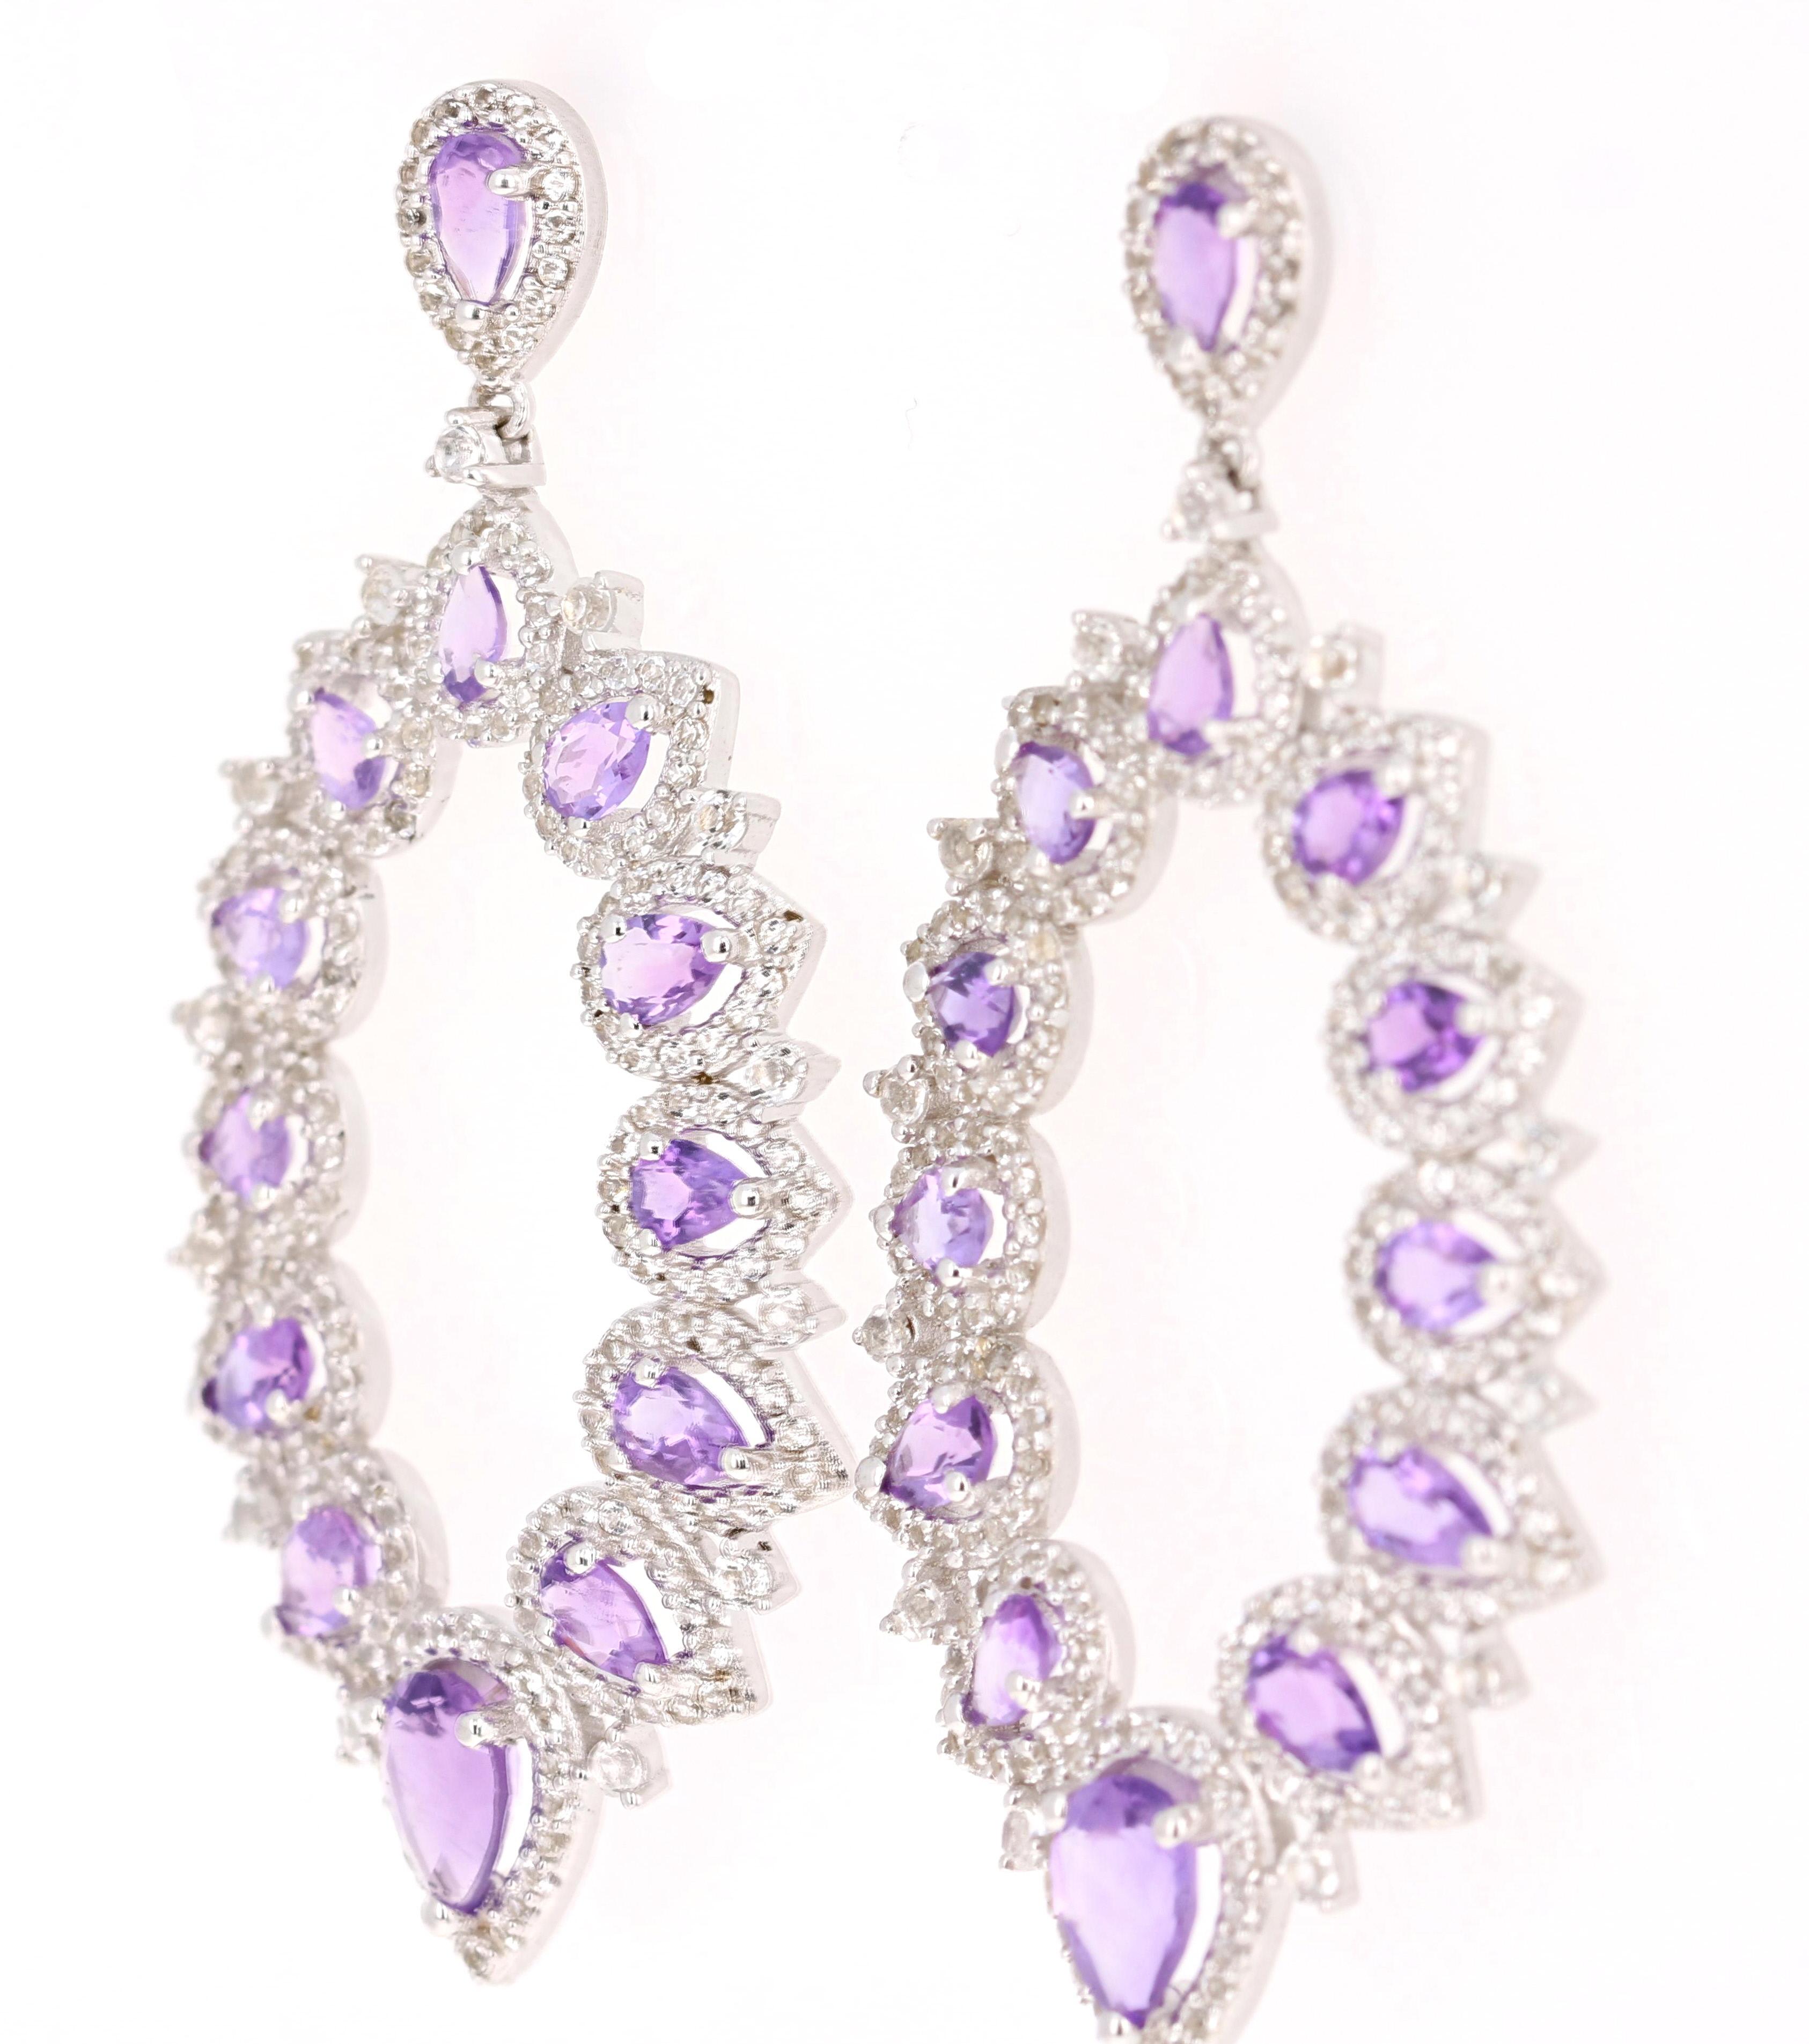 Contemporary 4.03 Carat Amethyst White Topaz Silver Earrings For Sale